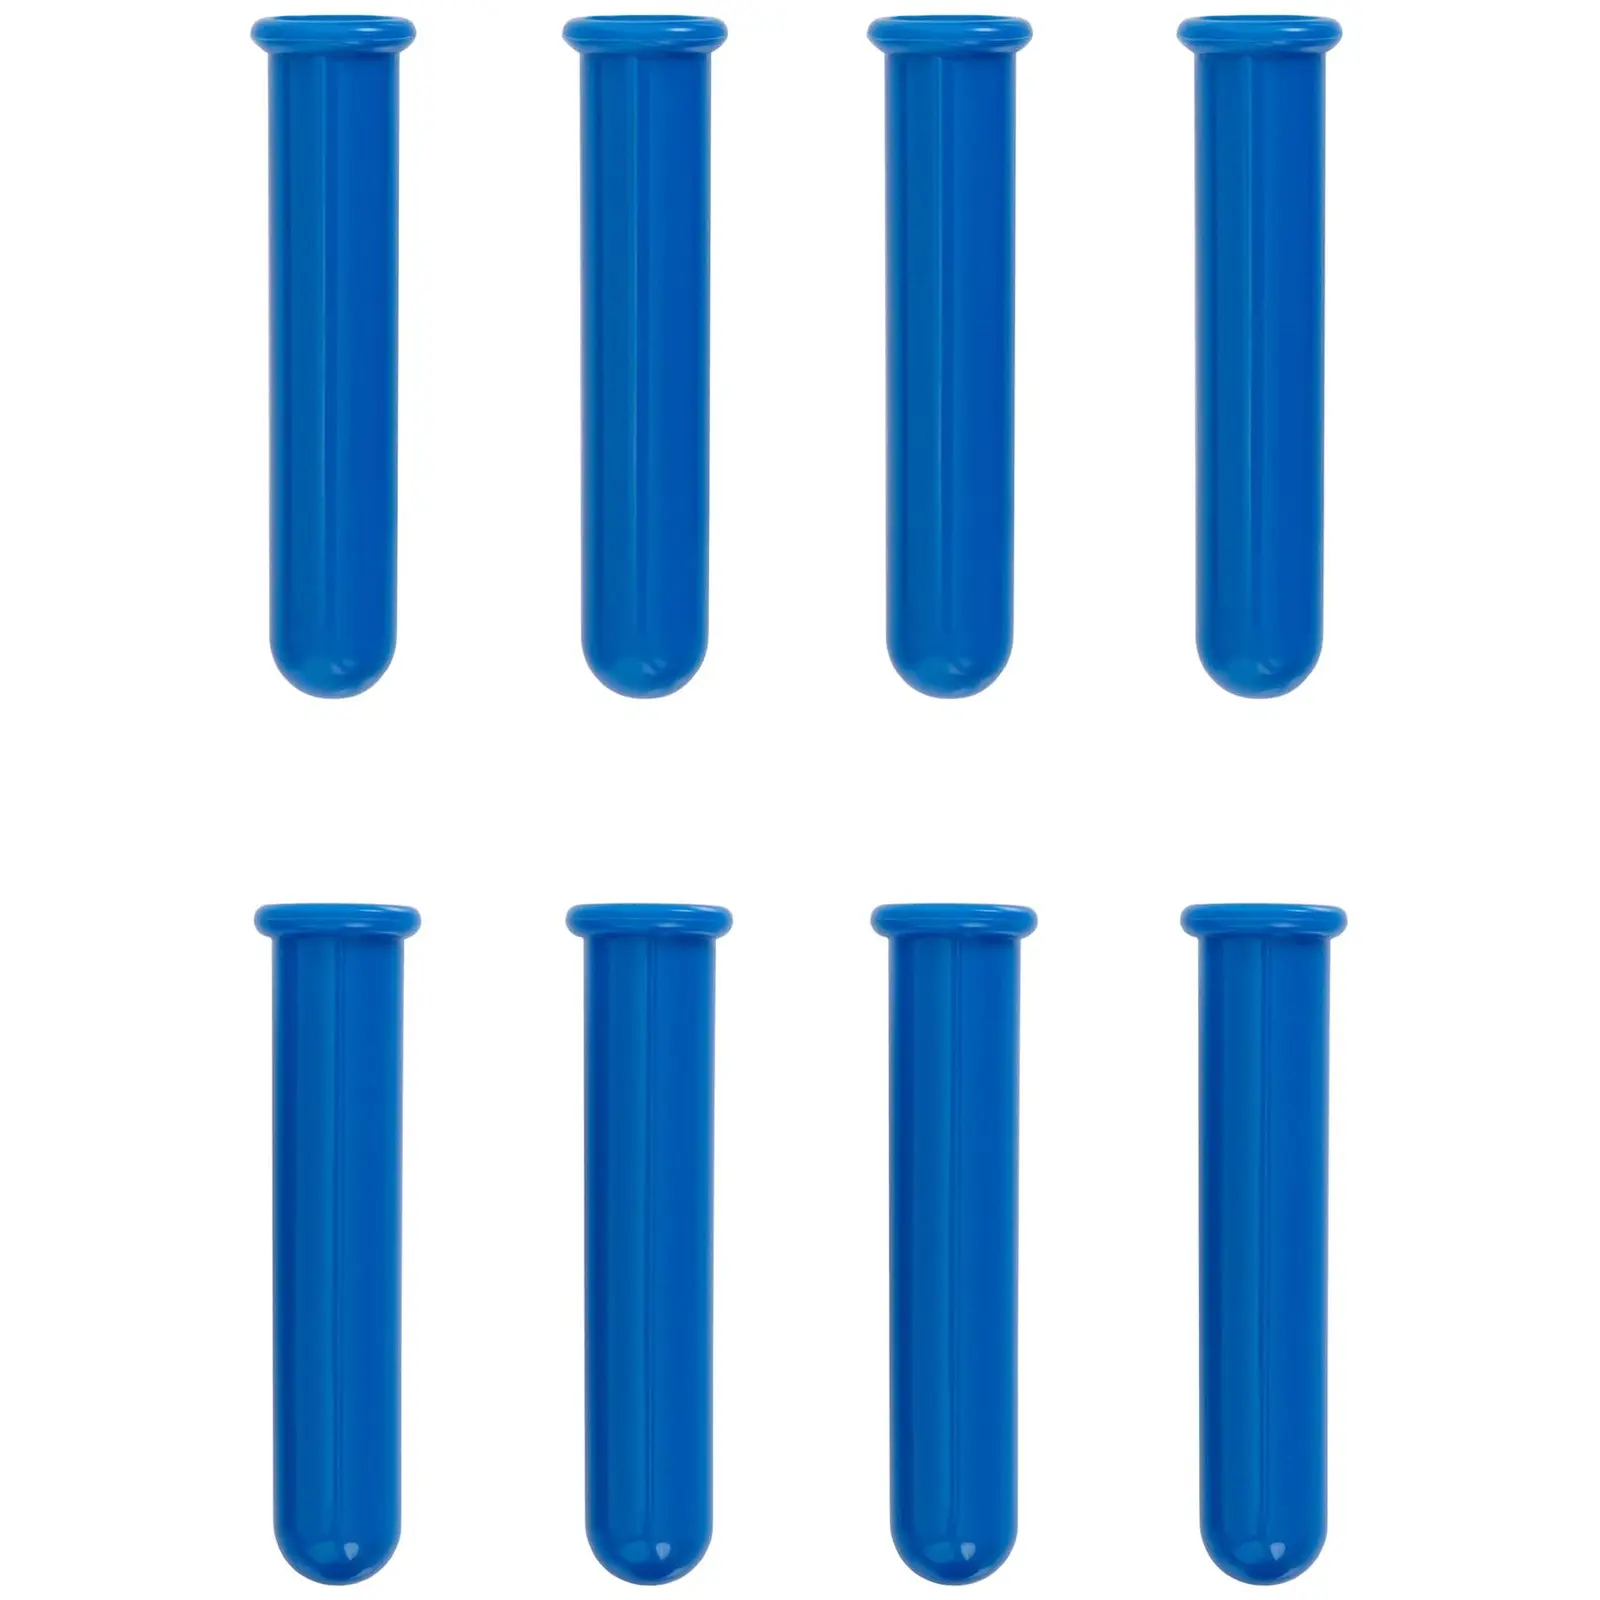 Centrifuge Tube Adapter - 8 pieces - 5 ml